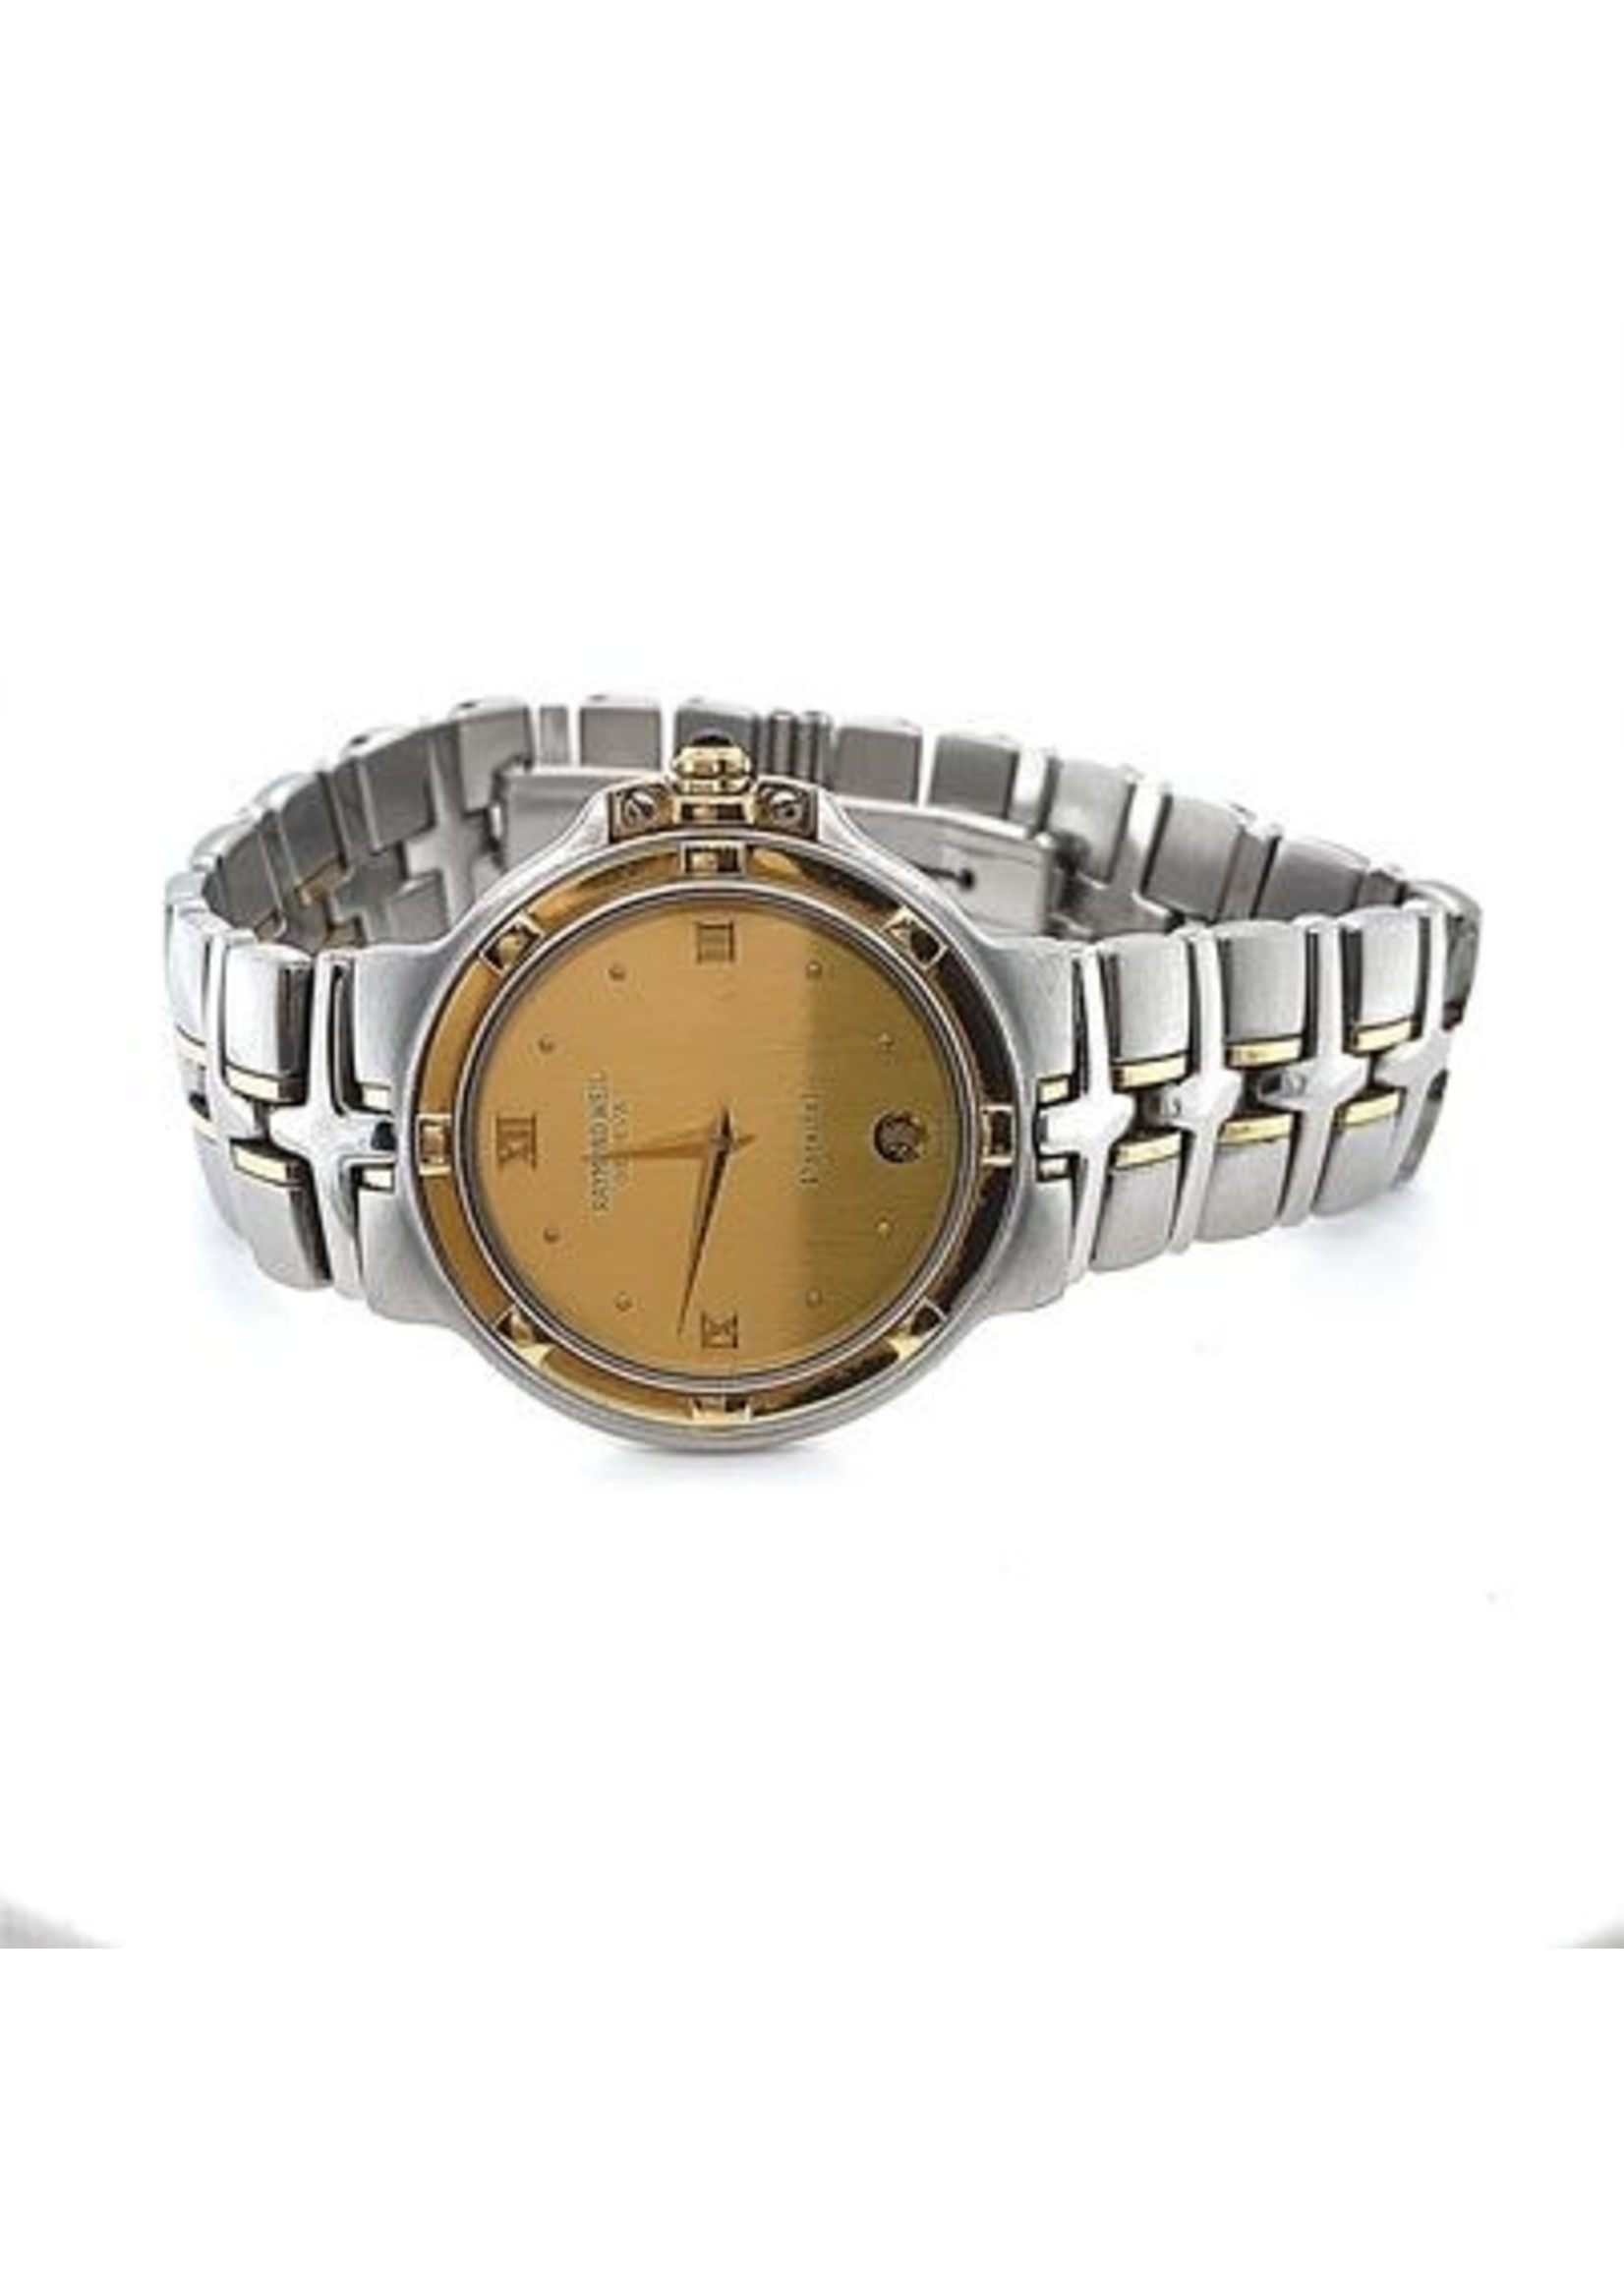 Vintage & Occasion Occasion Raymond Weil Parsifal 9190 bicolor horloge